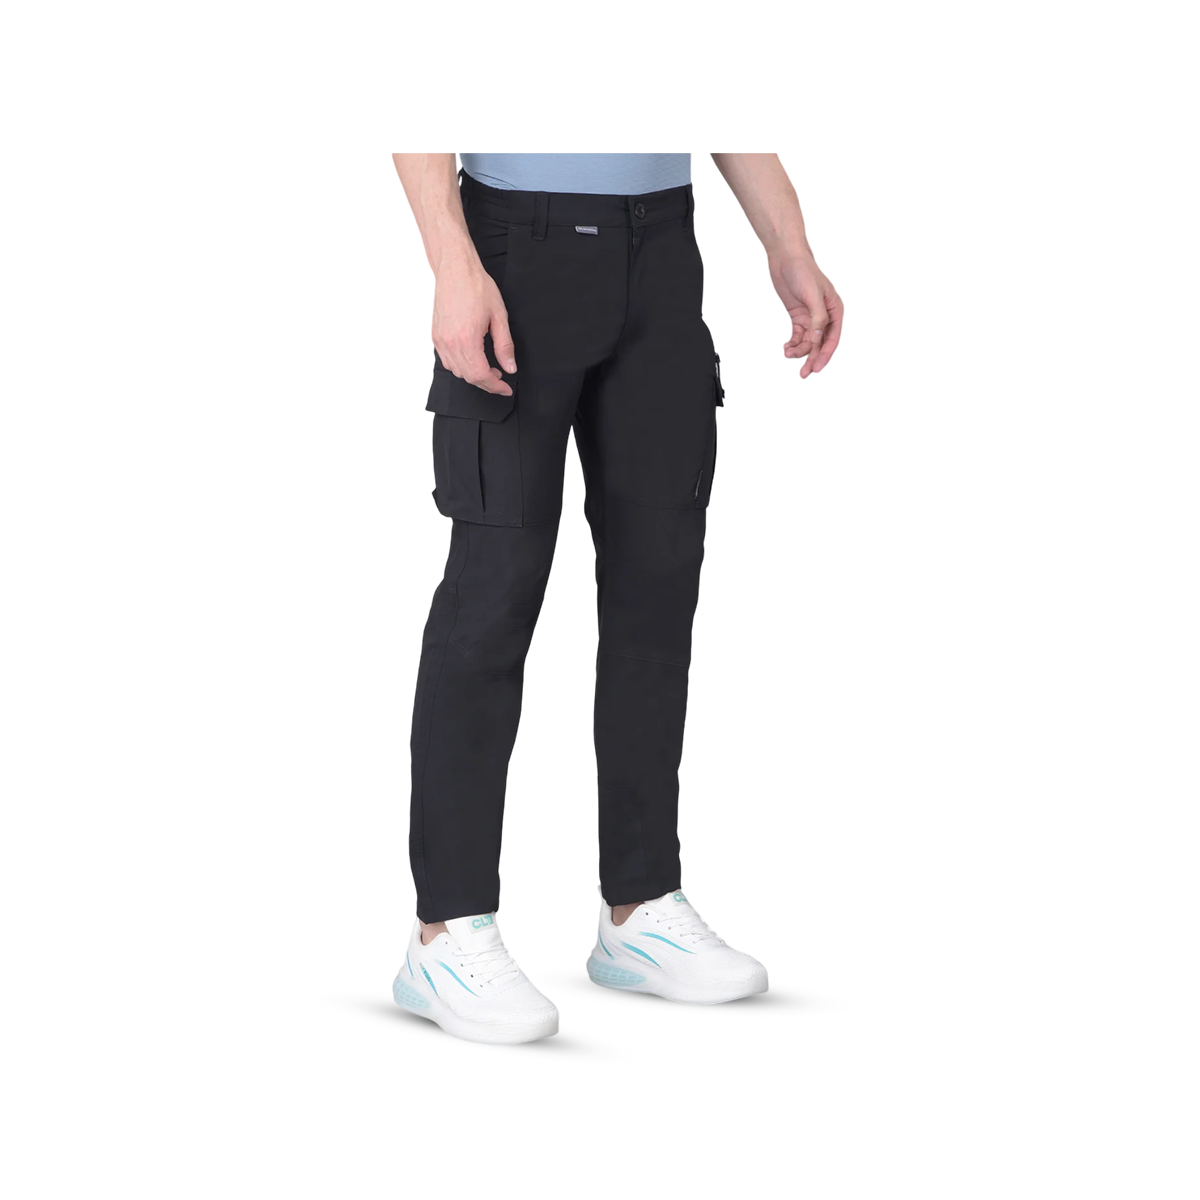 QUADRA Black Trouser for Sleek Style and All-Day Comfort - XXL